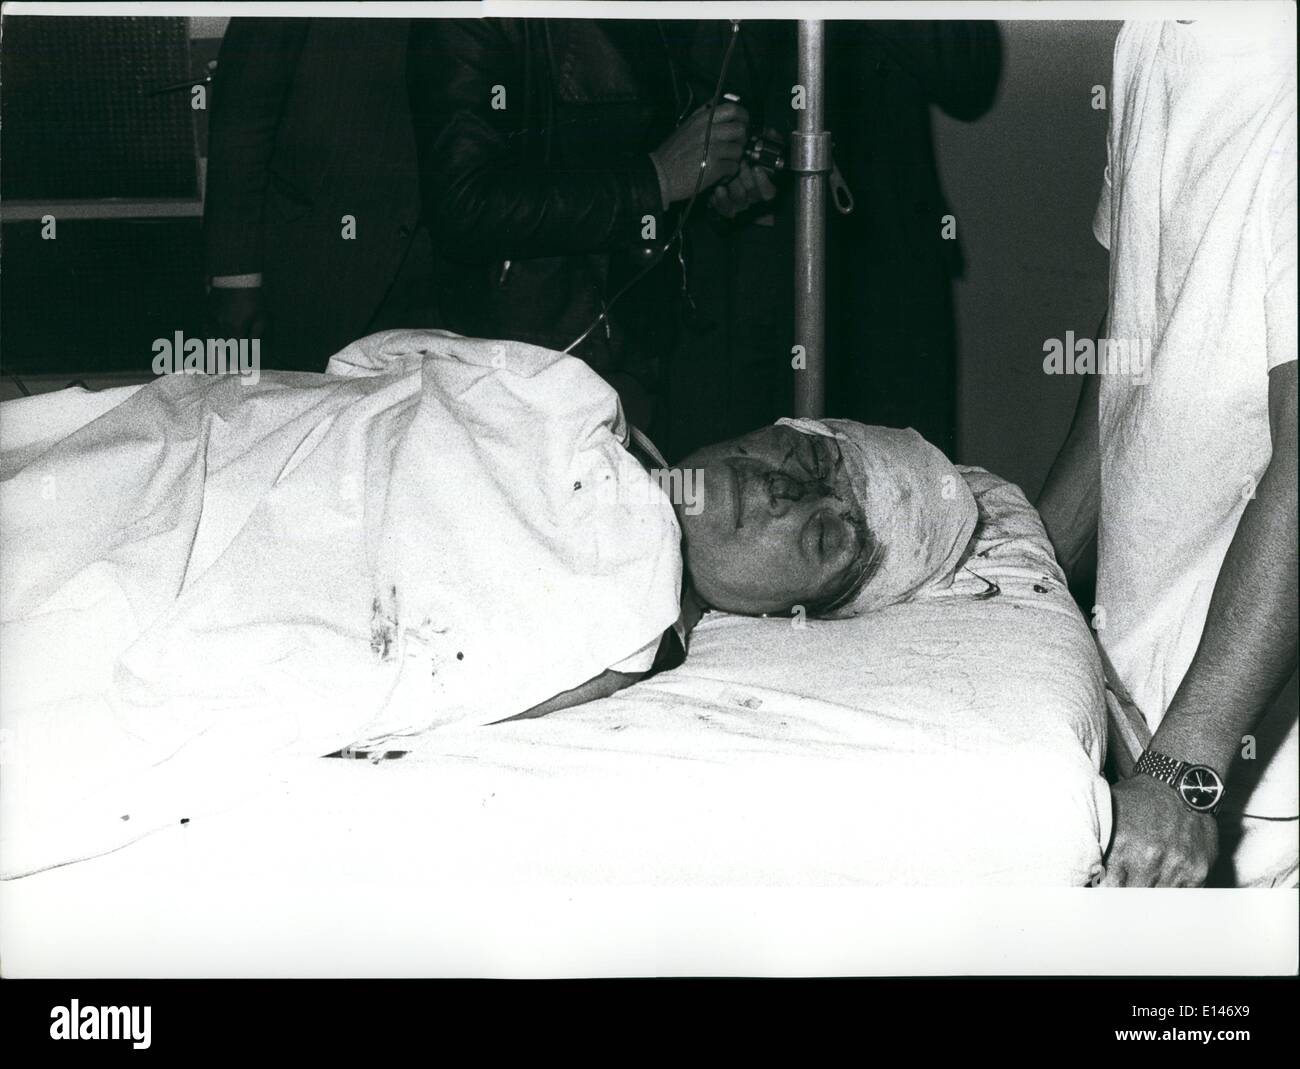 Apr. 16, 2012 - One woman killed and about thirty persons seriously injured in bomb blast. Milan 17 May 1973: At the occasion of the unveiling germany of the bust of police commissioner Luigi Calabresi who was murdered a year ago, a criminal threw a bomb into the crowd. Photo shows One of the many seriously wounded persons immediately upon arrival at the milan first - Aid Station. Stock Photo